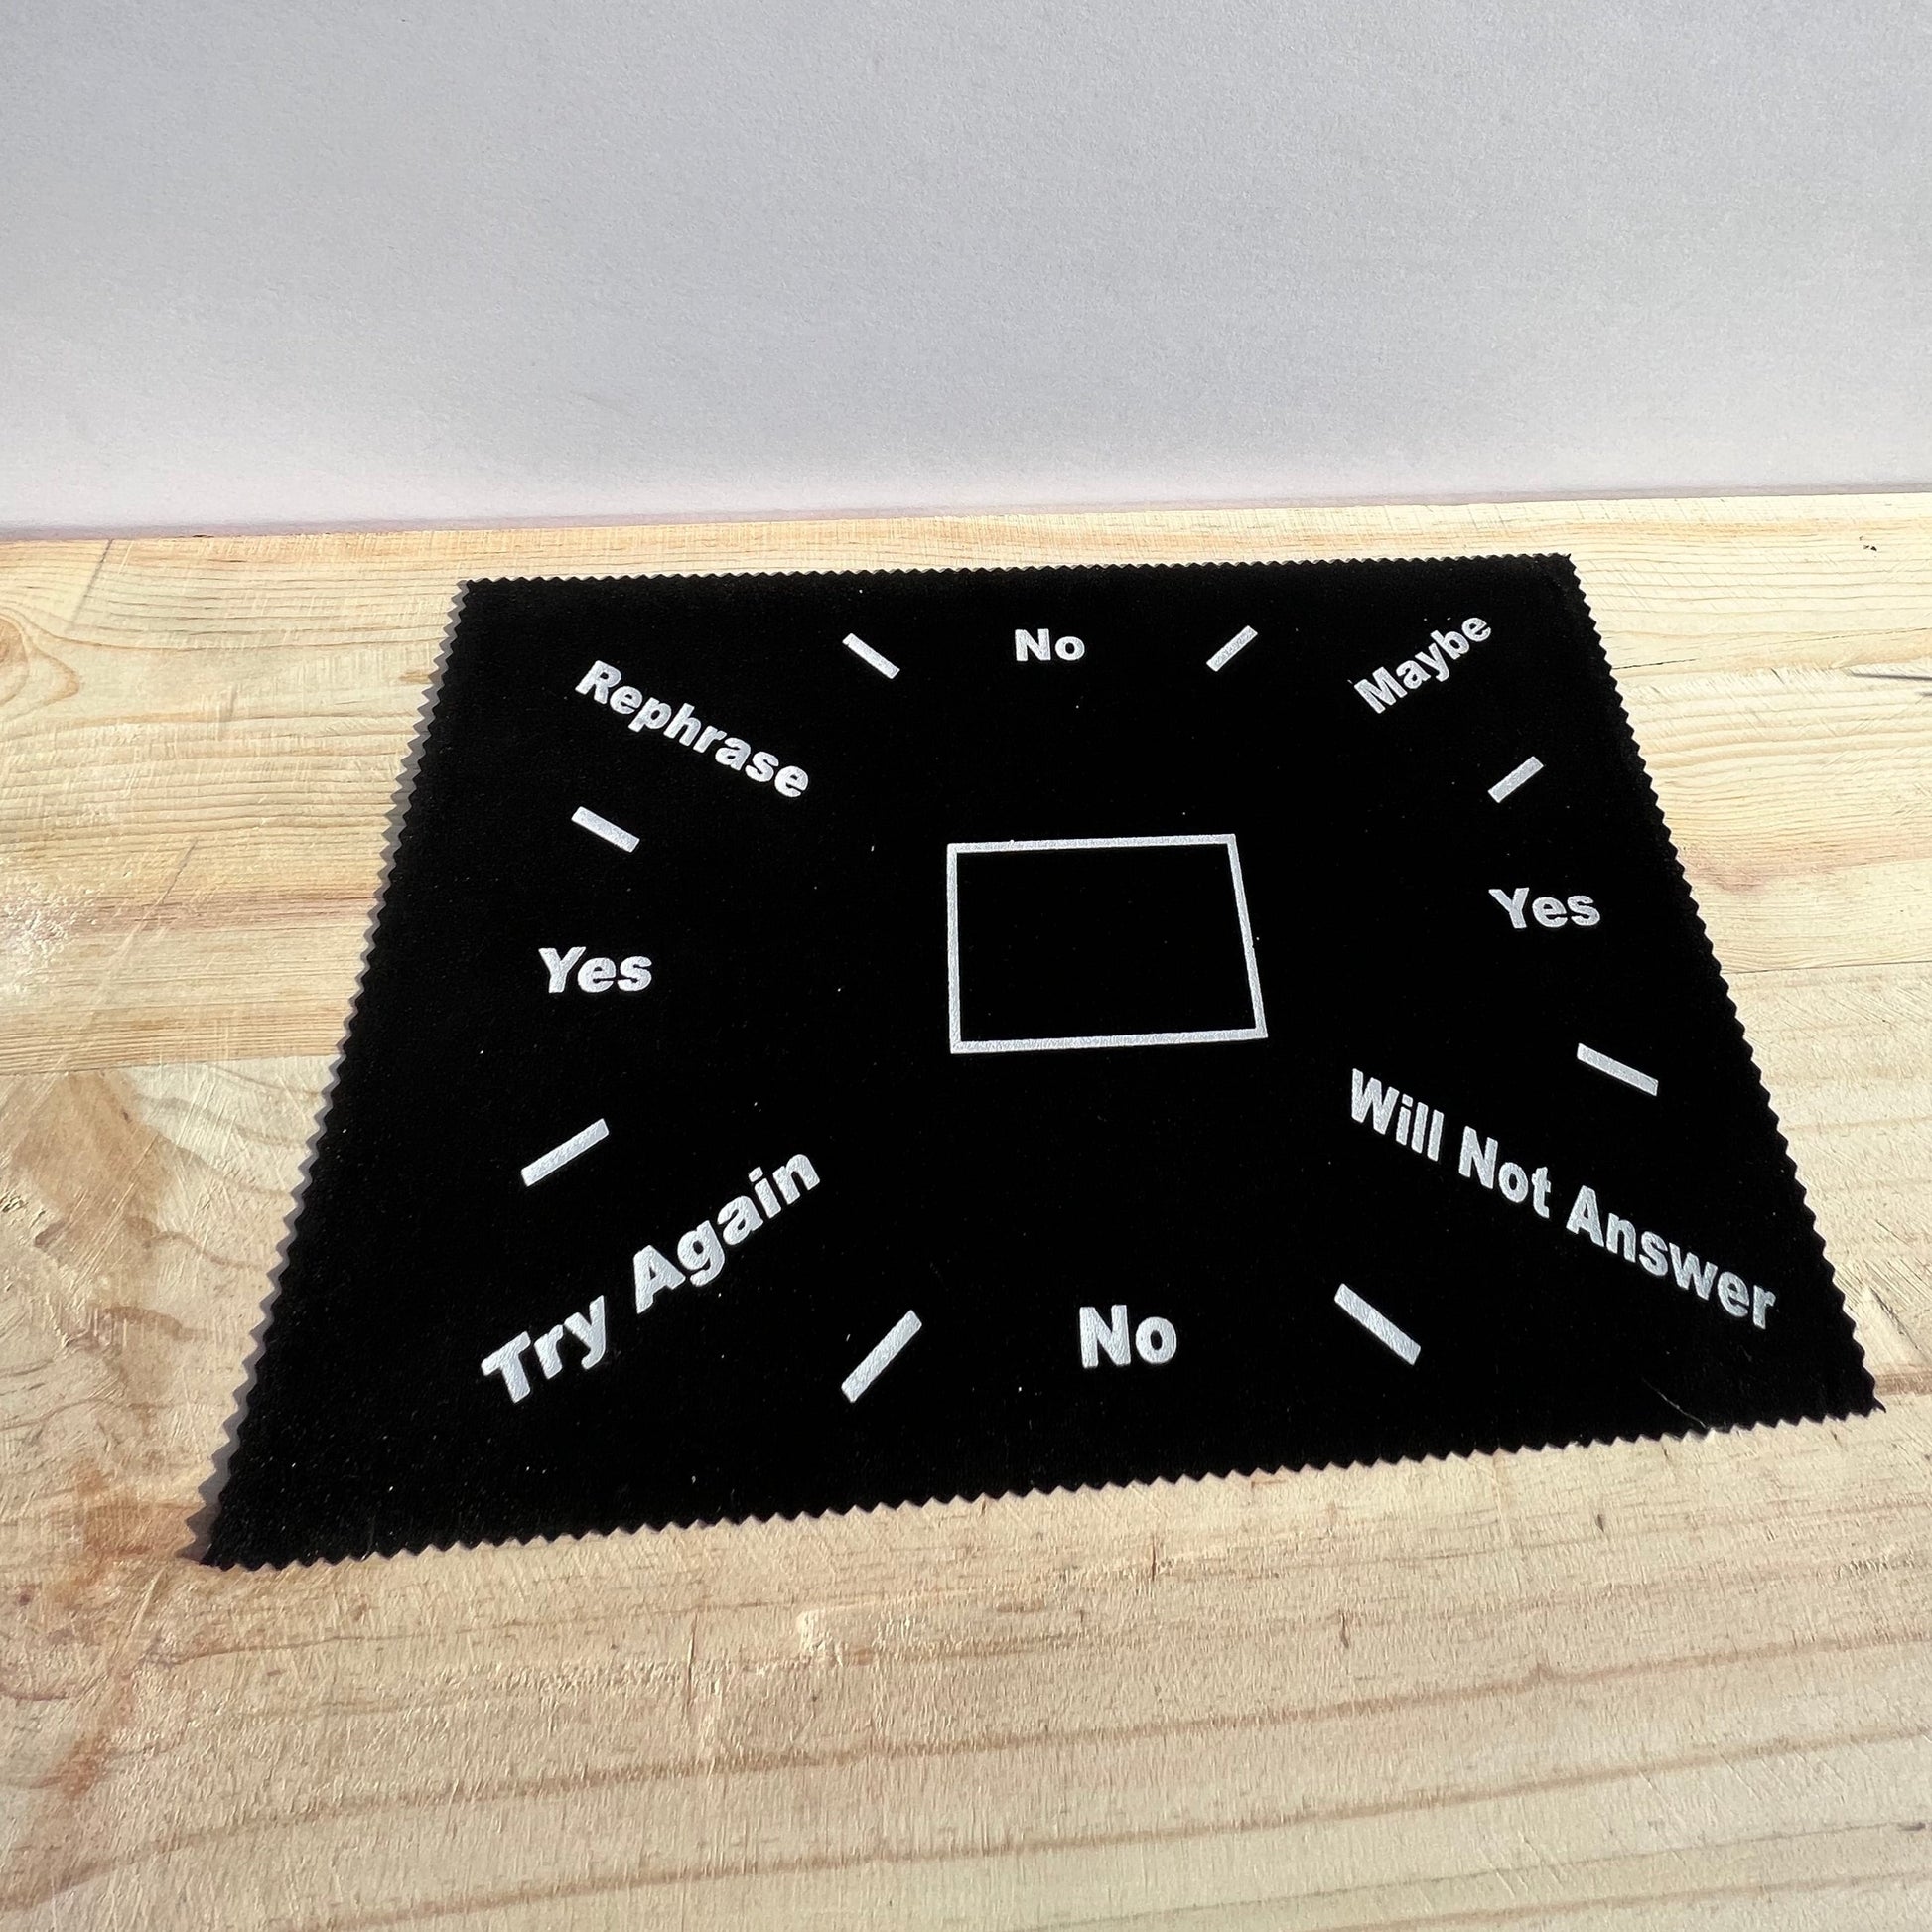 A basic pendulum mat featuring a center square, with "No" written at the top & bottom, "Yes" on the left and right, "rephrase", "maybe", "try again", and "will not answer" appear diagonally.